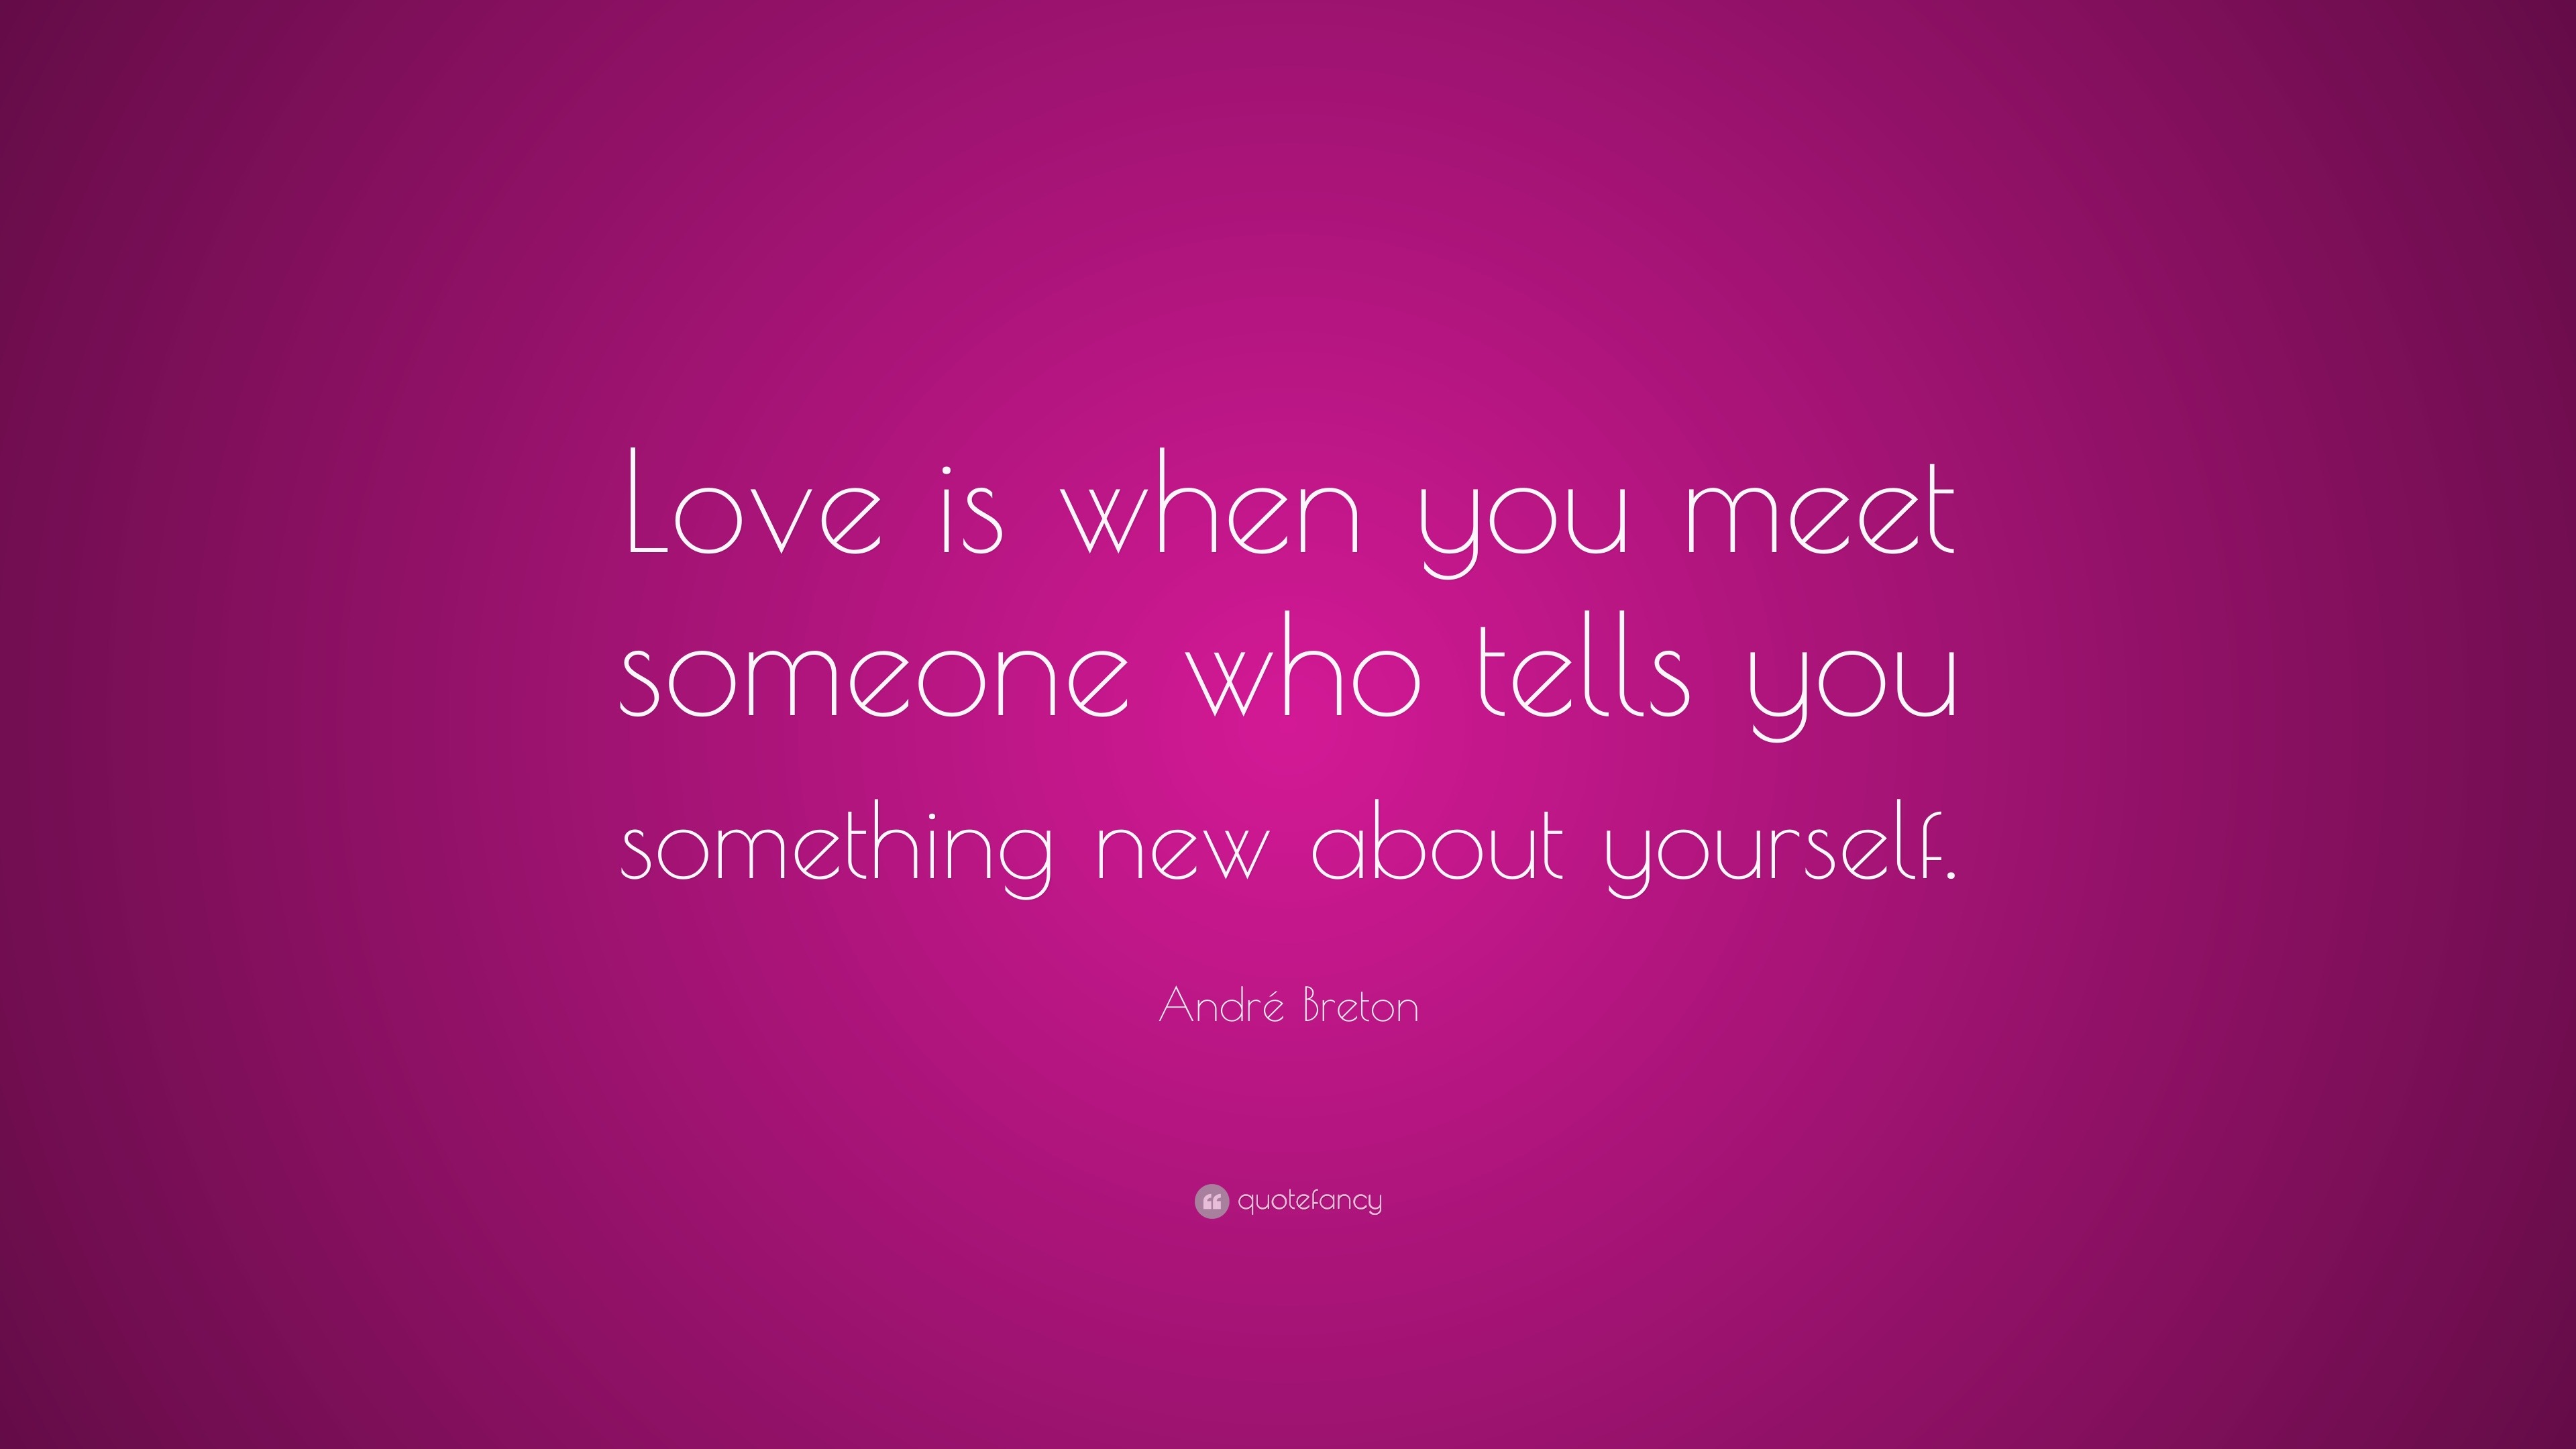 André Breton Quote “Love is when you meet someone who tells you something new